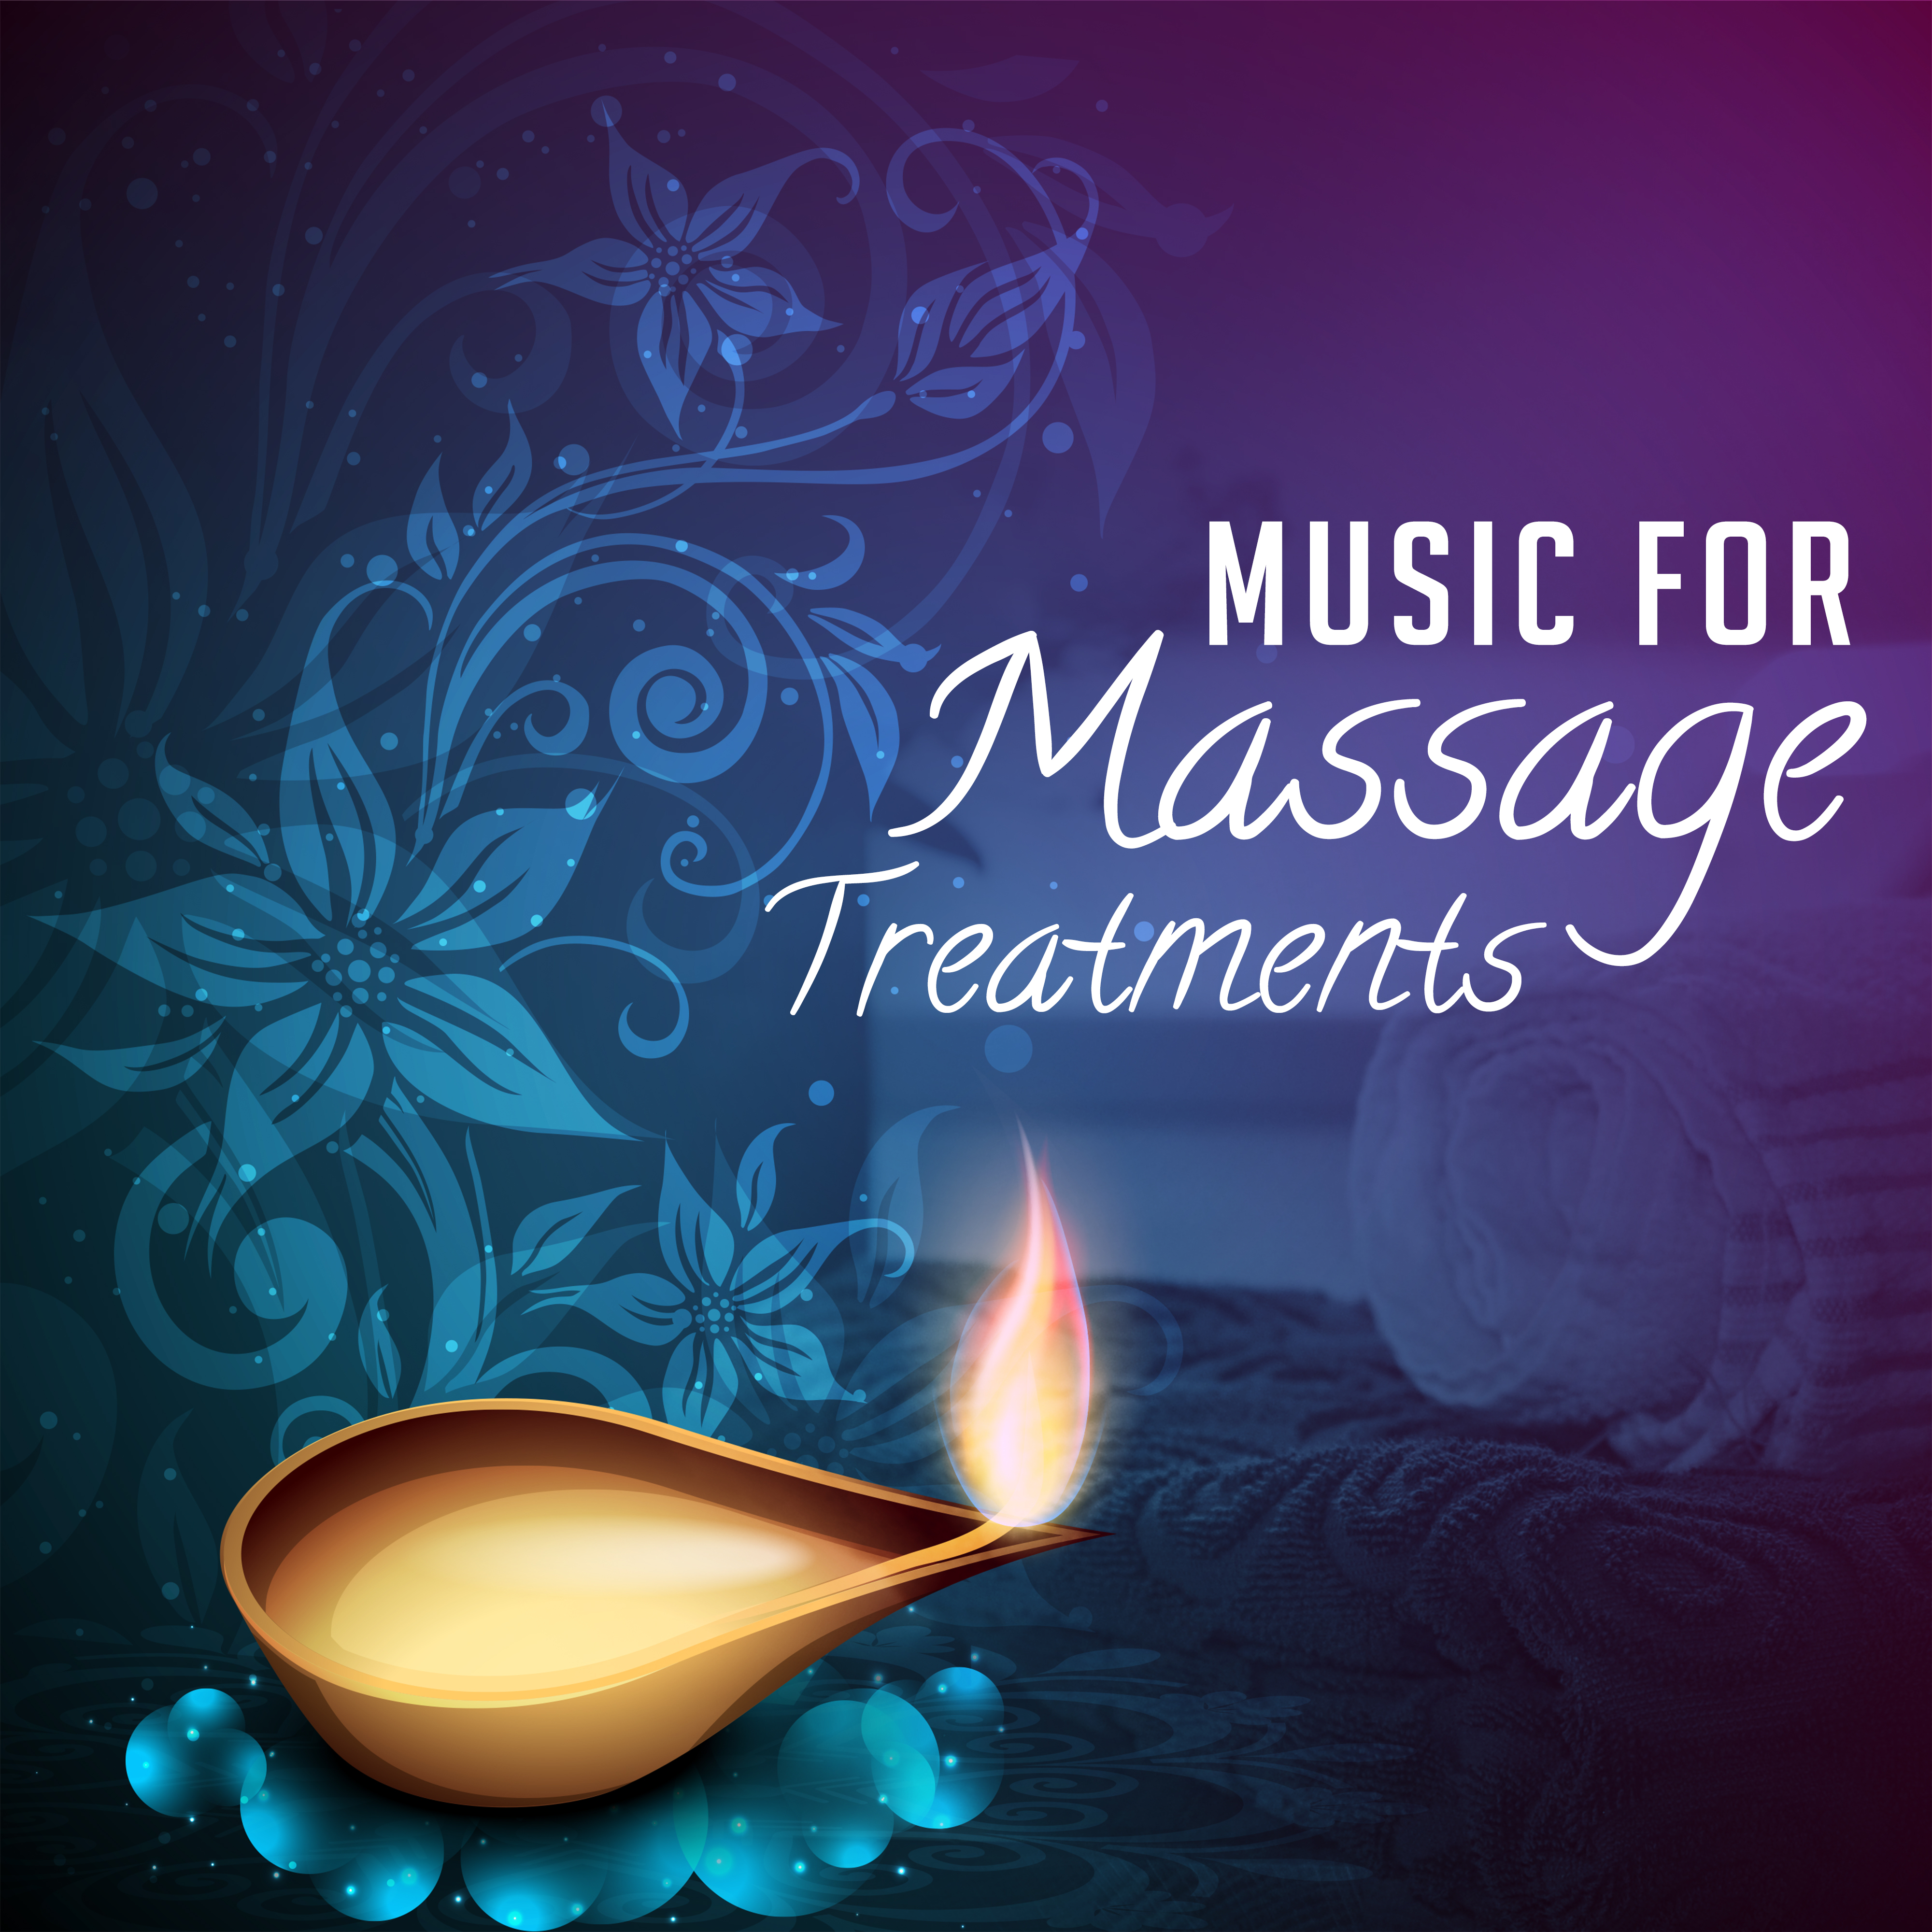 Music for Massage Treatments  Relaxing Music, The Best Background Songs for Spa, Wellness Therapy